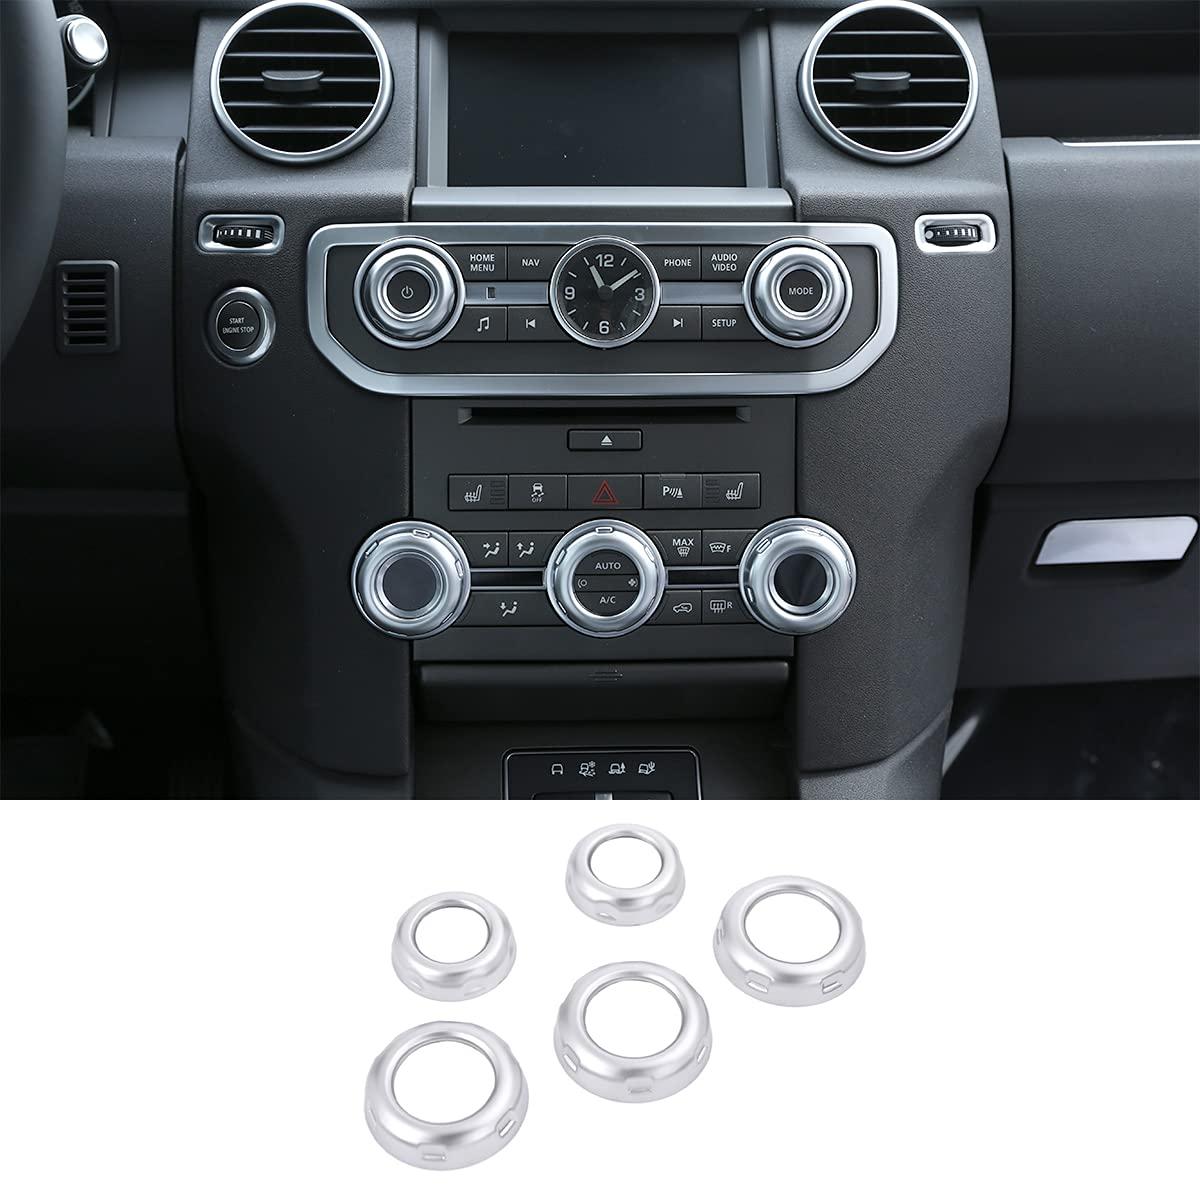 YUECHI 5PCS ABS Volume and Air Conditioning Button Knobs Cover Trim for Land Rover Discovery 4 2010-2016 / Range Rover Sport 2010-2013